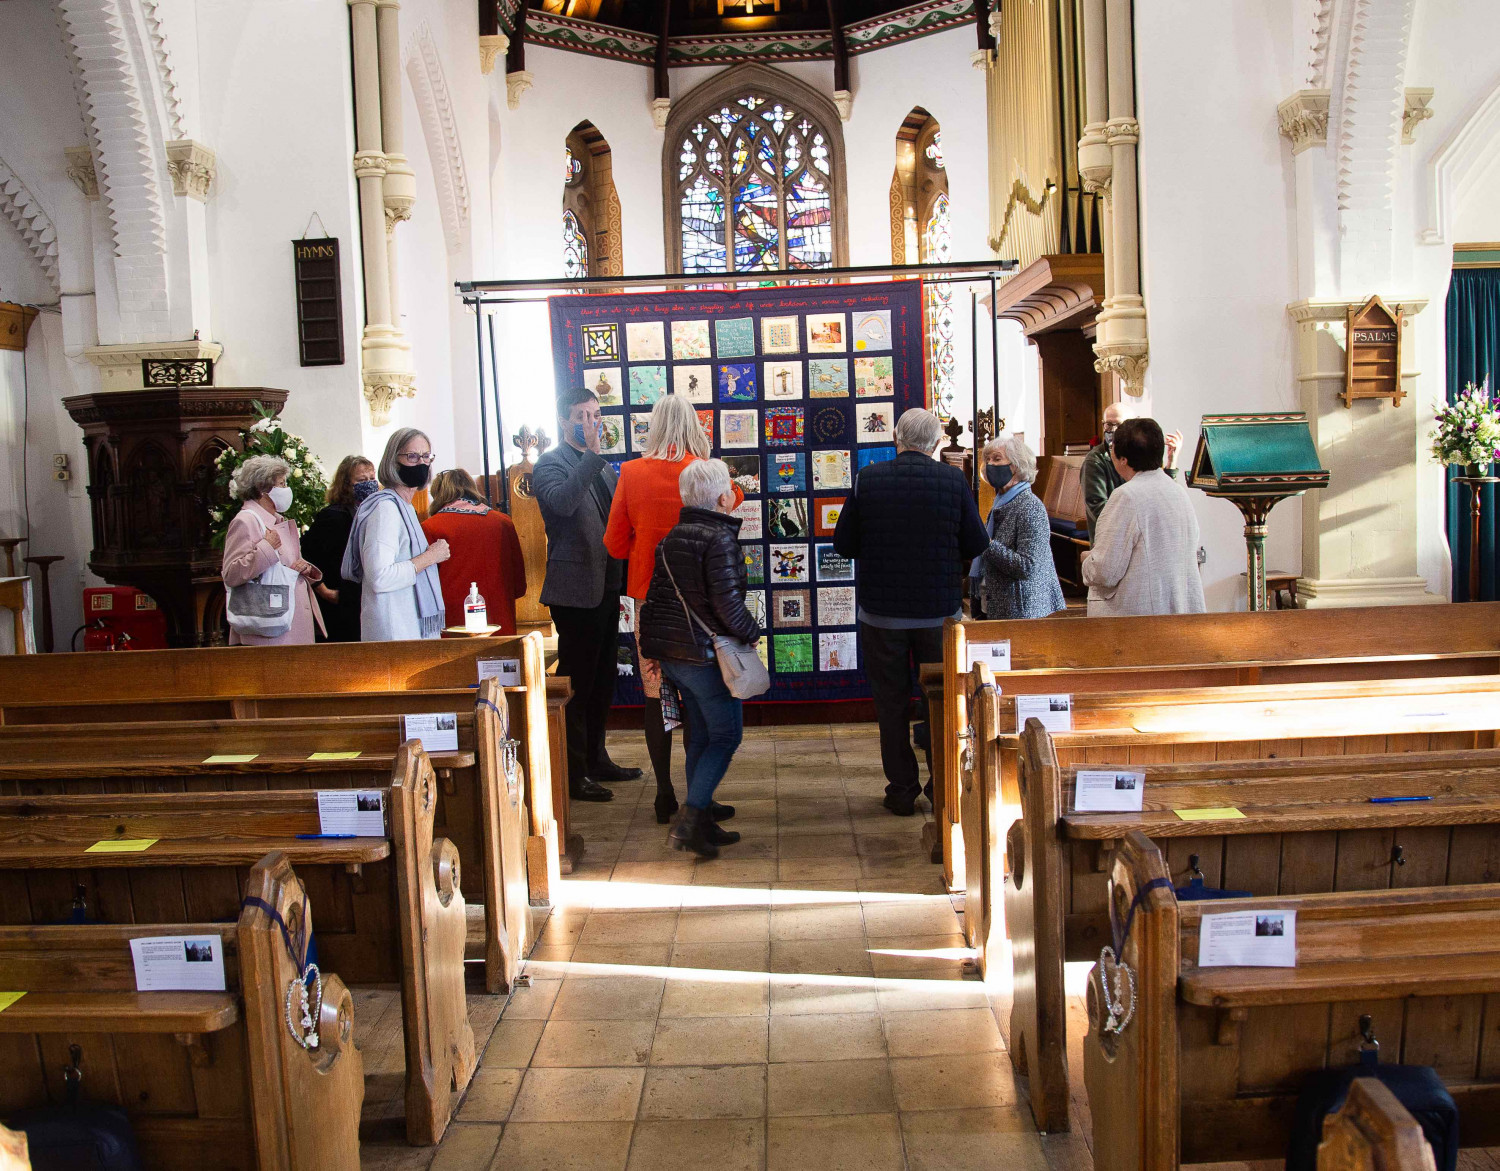 Photograph of people looking at a textile quilt in a church